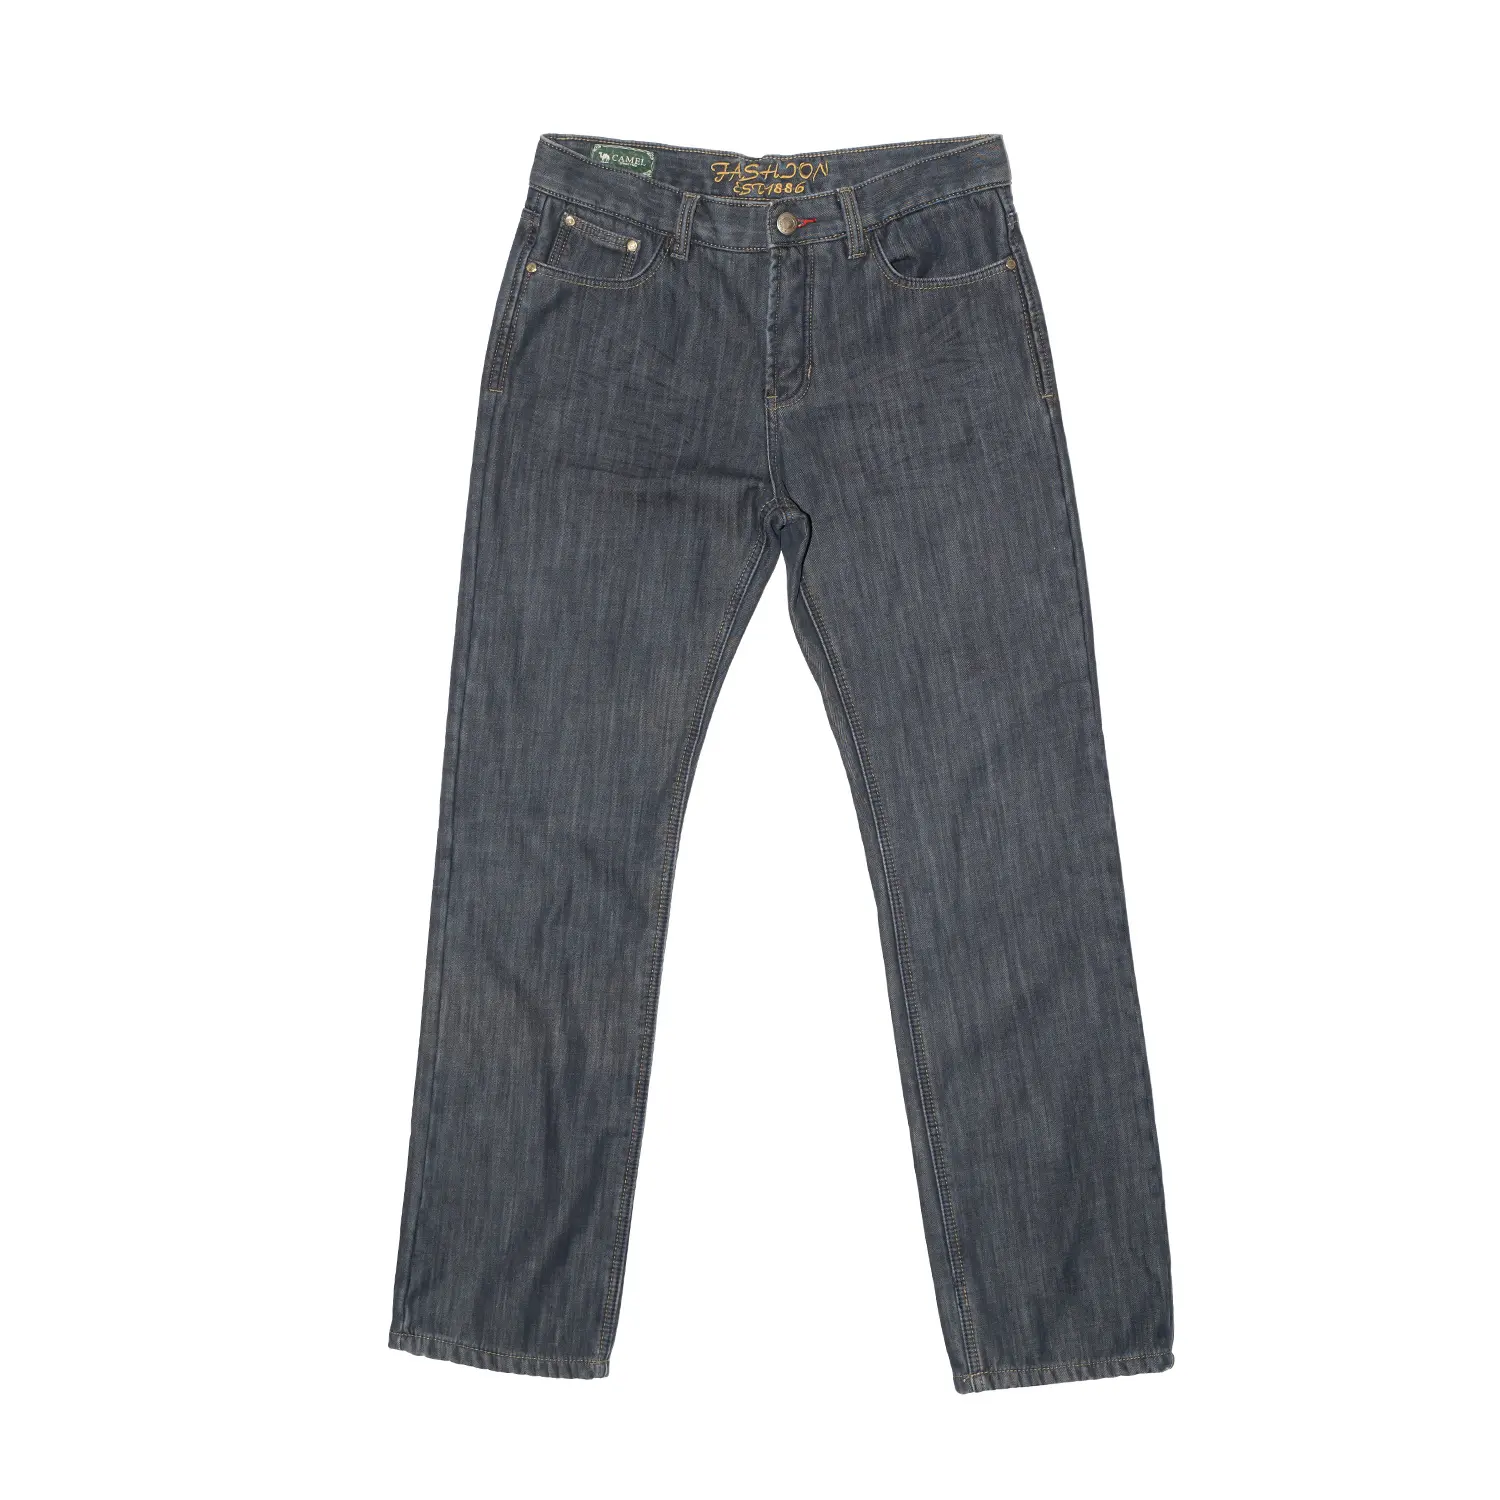 Second Hand Used Men Jeans Pants Wholesale T-shirt Bales New York Asia Japan India BSG Used clothes